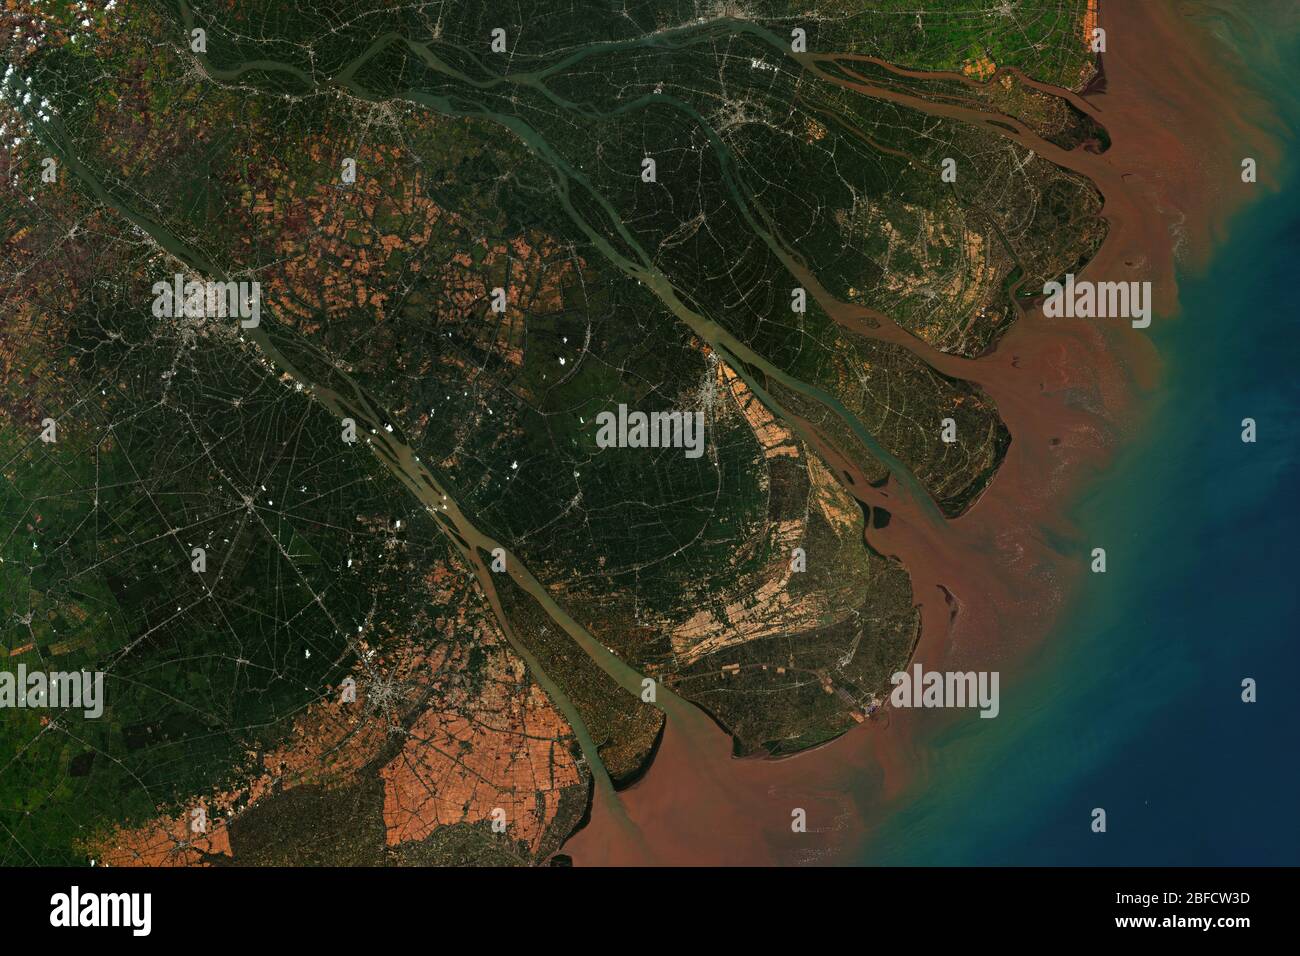 Mekong River Delta in Vietnam, where the Mekong River approaches and empties into the South China Sea, seen from space - contains modified Copernicus Stock Photo